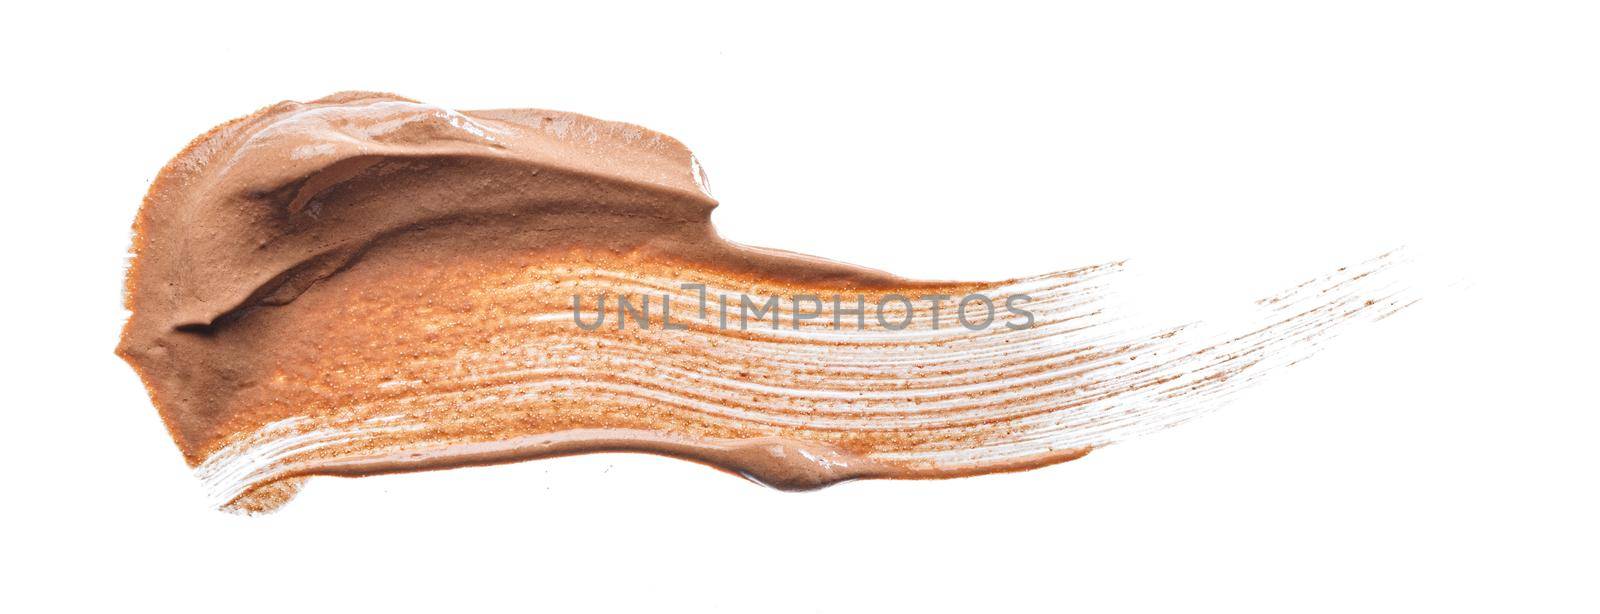 Smudged stain of a cream foundation isolated on white, close up.